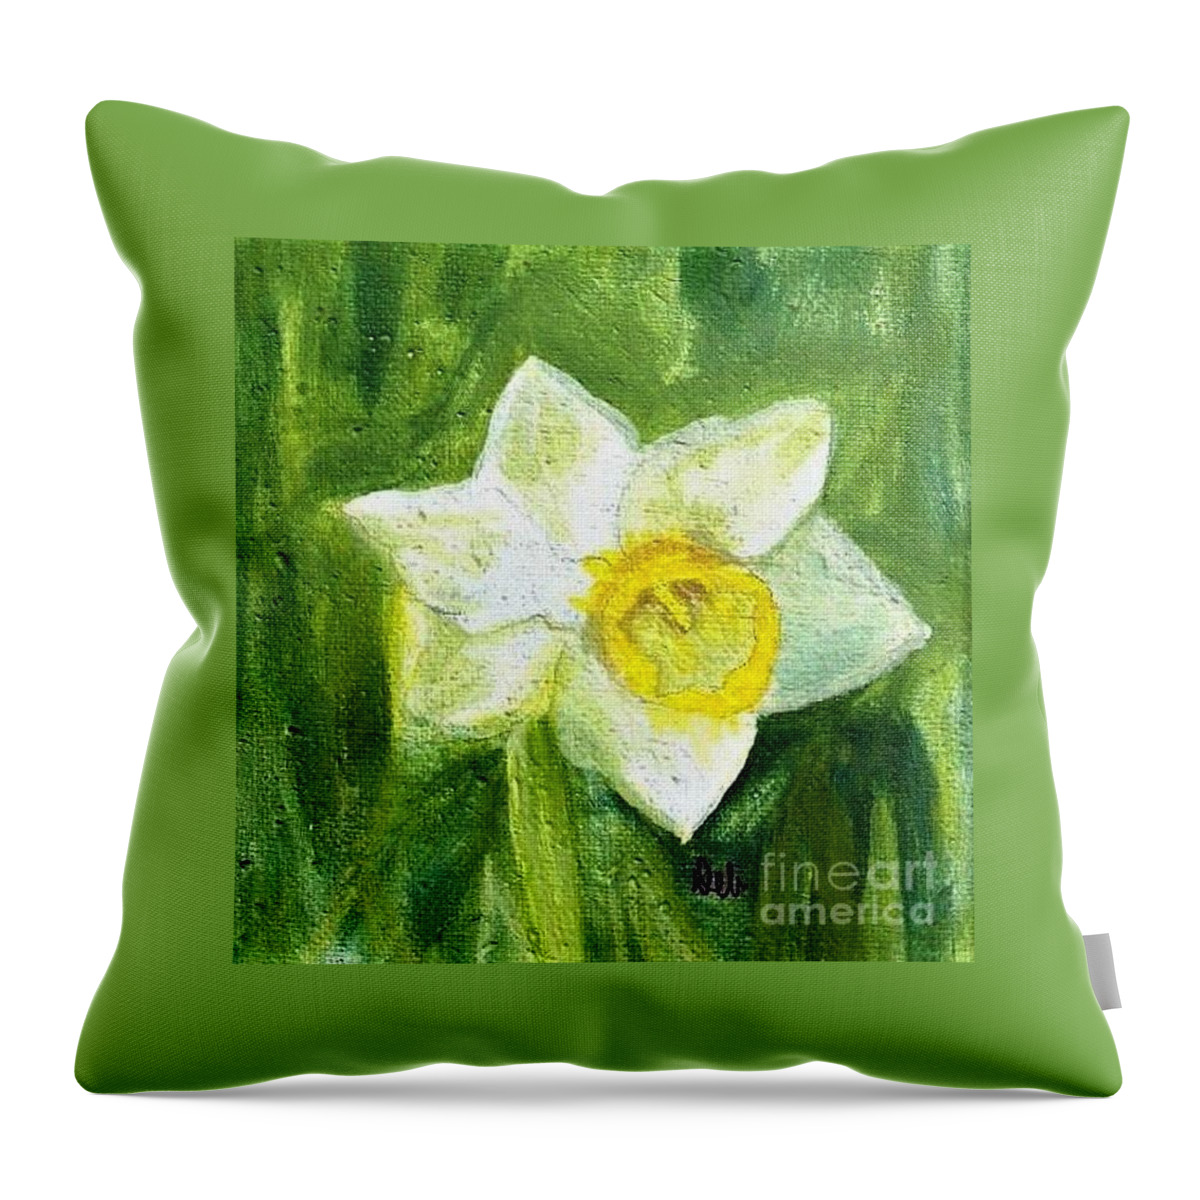 Daffodil Throw Pillow featuring the painting Daffodil by Deb Stroh-Larson